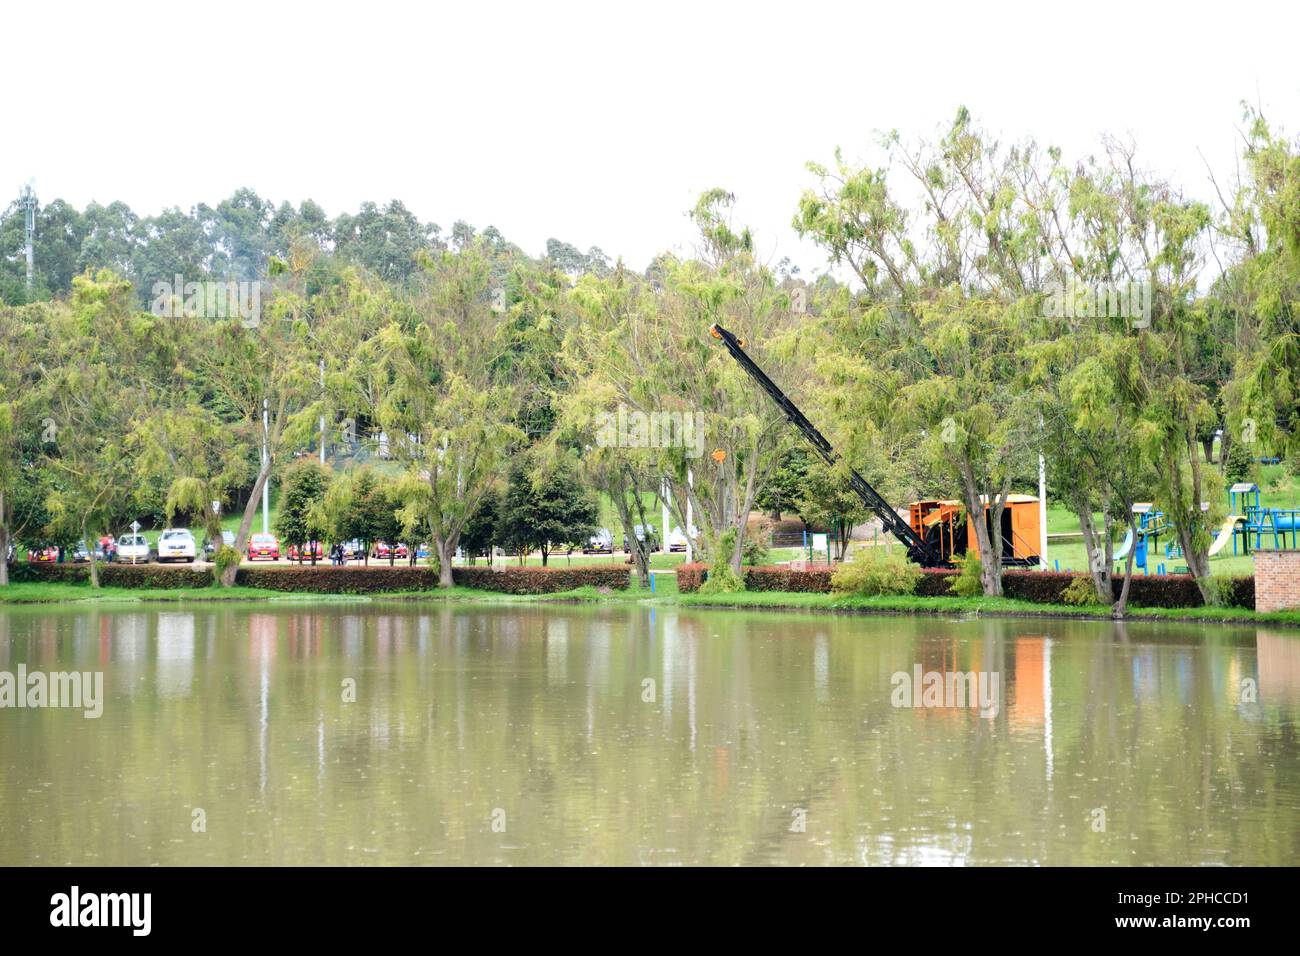 January 22, 2023, Sopo, Colombia: lake of the Sopo Bridge Park. On the bank, an old steam shovel used for the construction and maintenance of irrigati Stock Photo